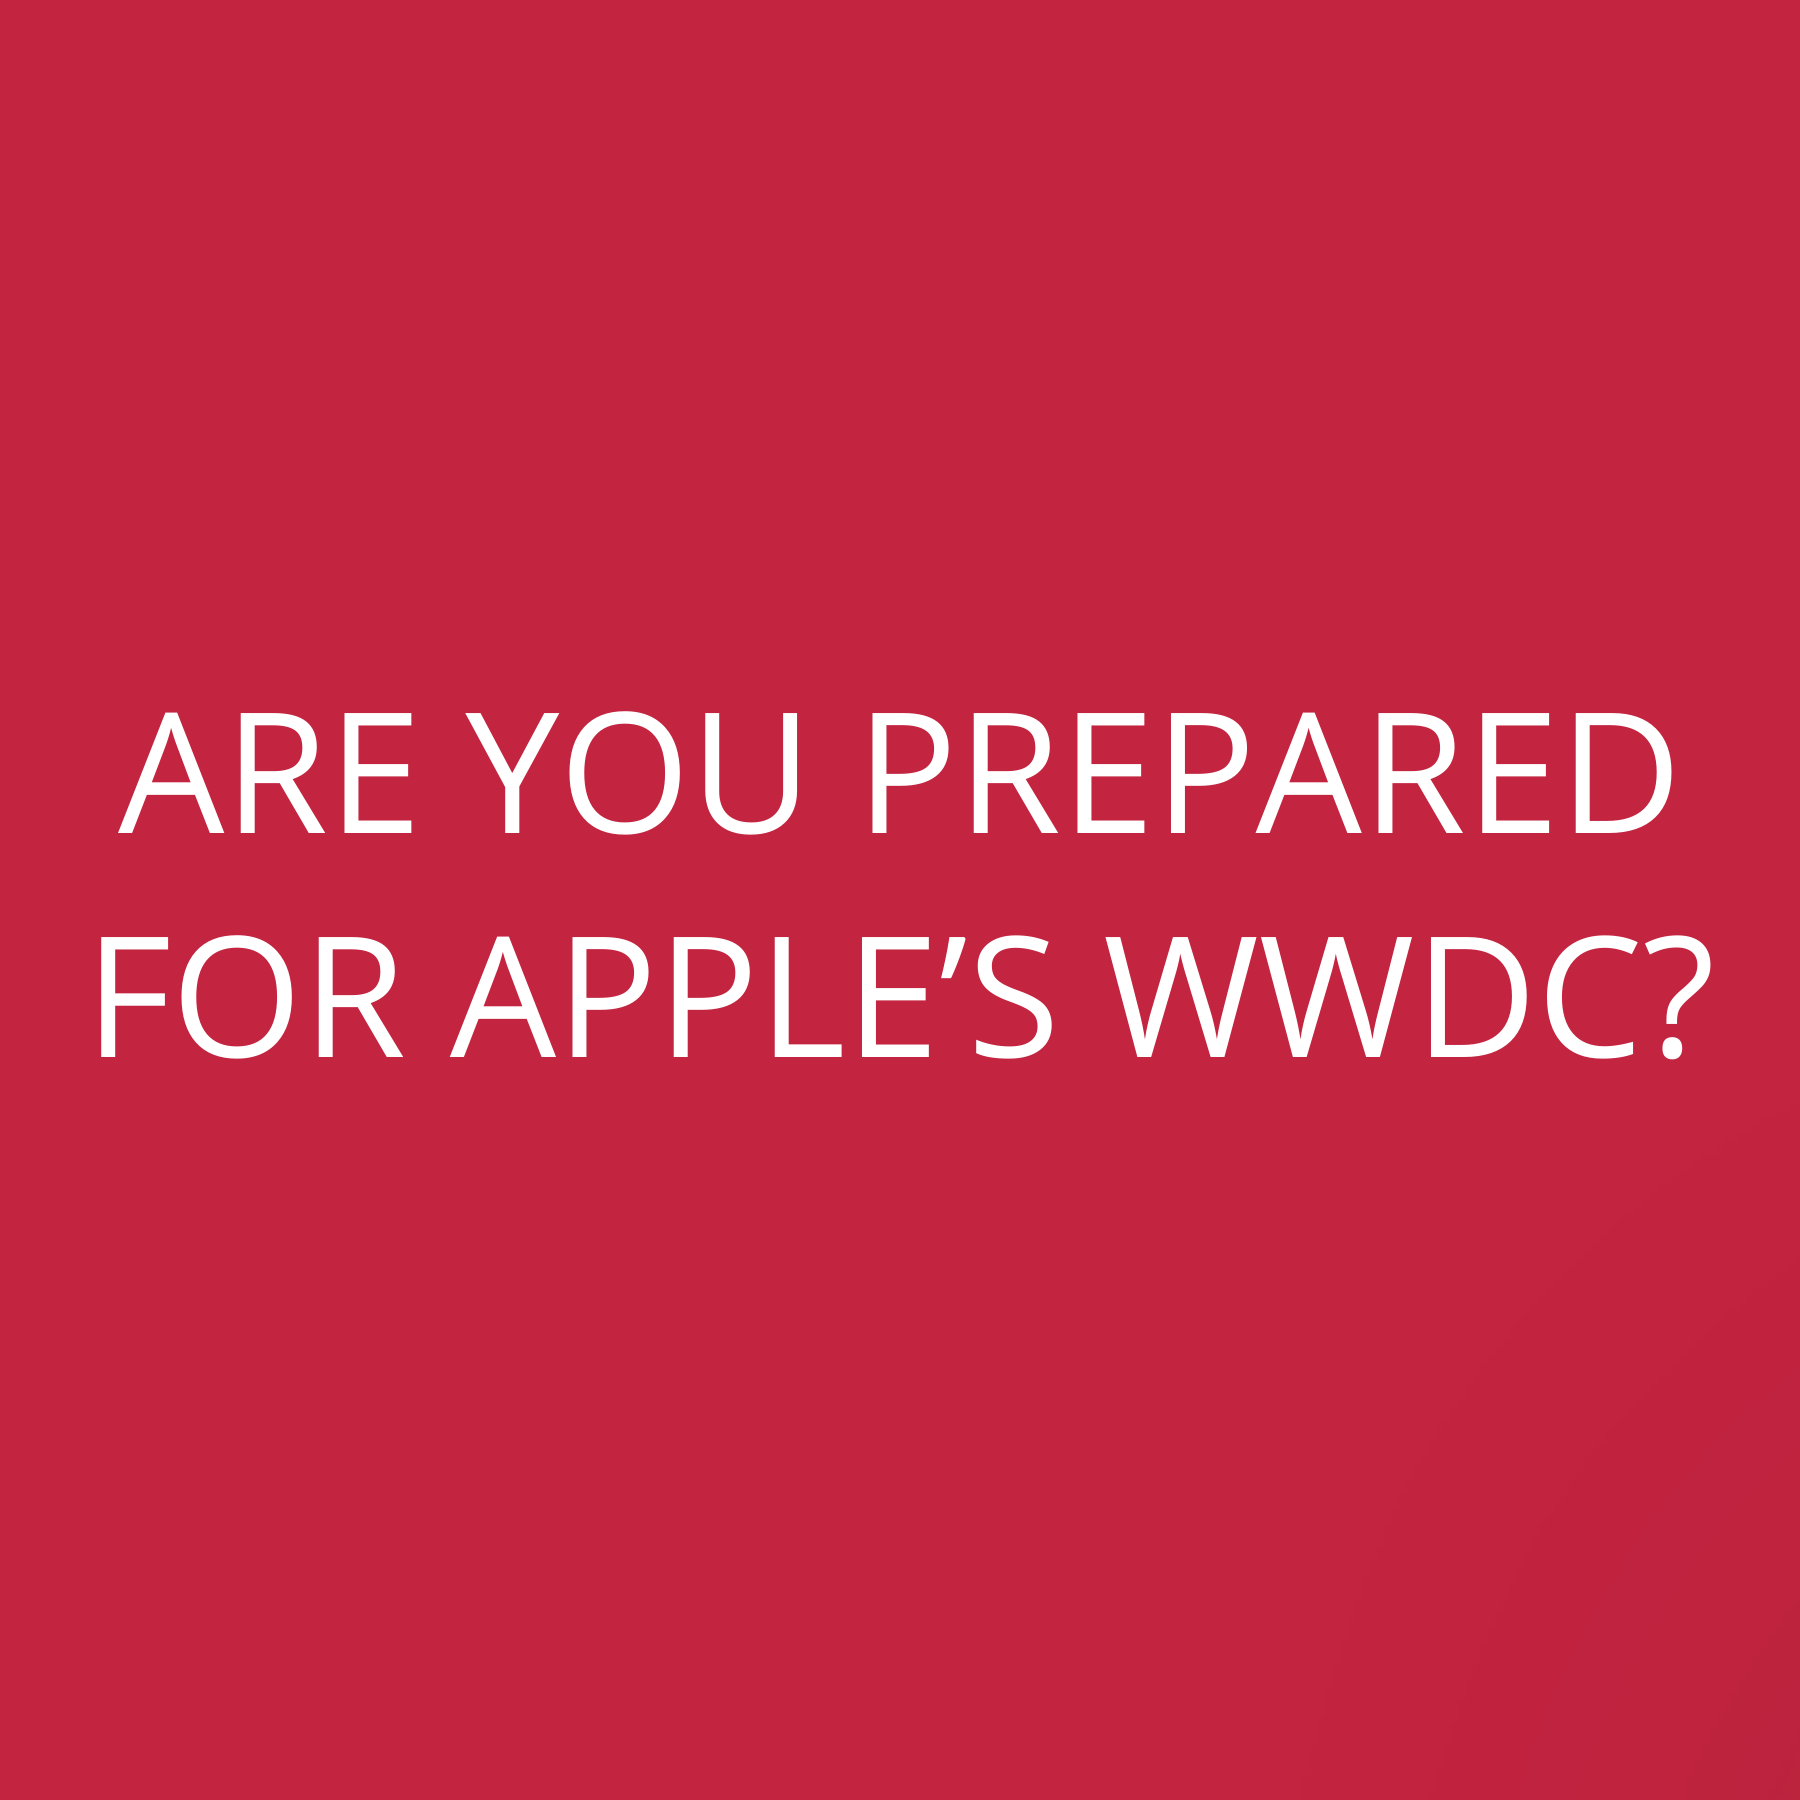 Are you prepared for Apple’s WWDC?